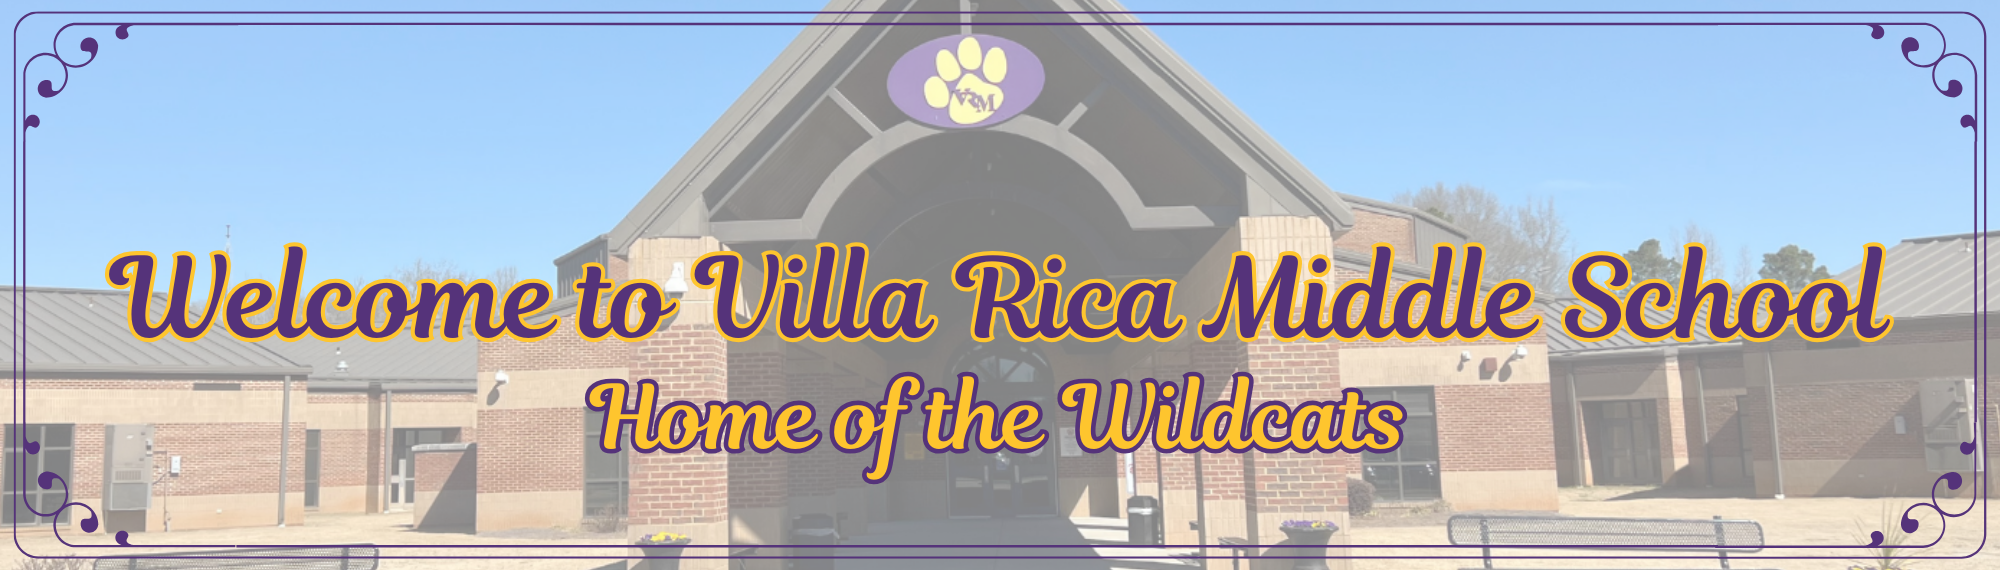 Welcome to Villa Rica Middle School. Home of the Wildcast.  On an image of the school